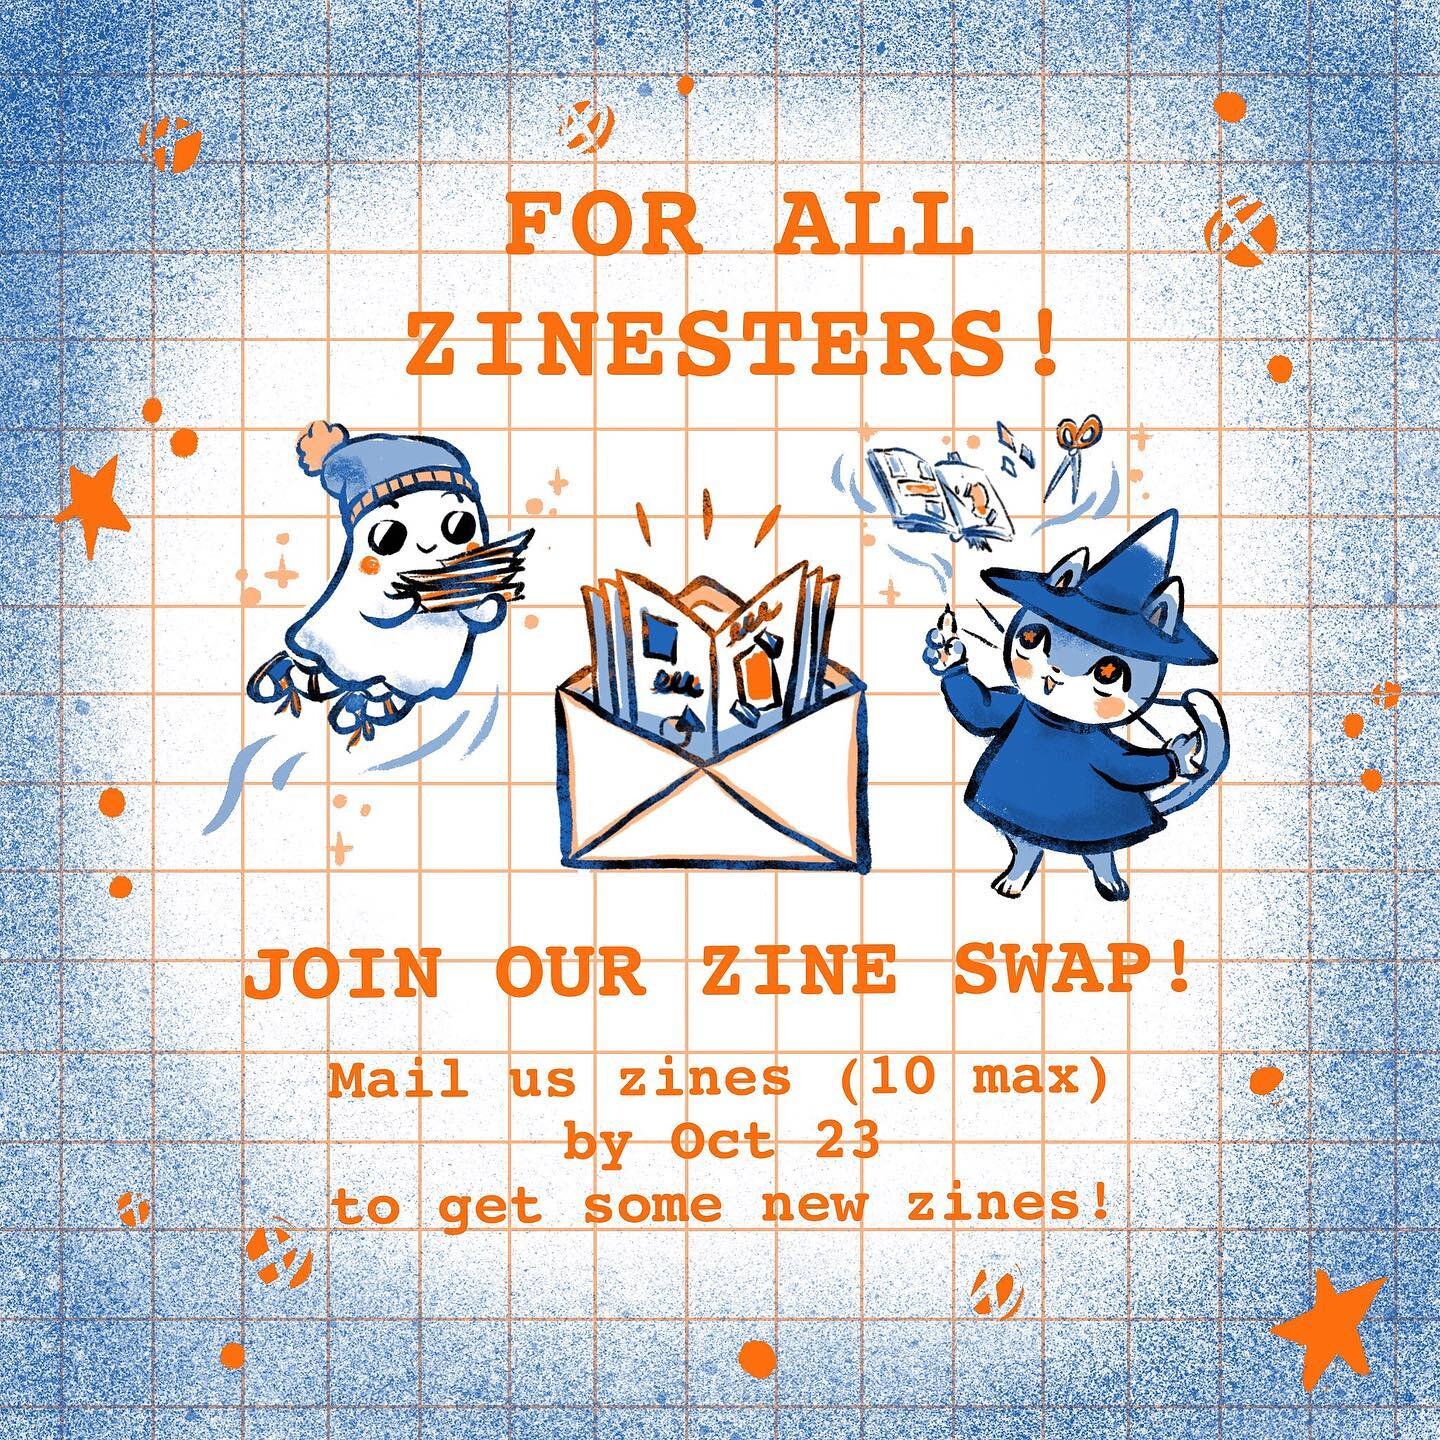 💌 Up for trades and want some physical zines 📒? Join @pikespeakzinefest&rsquo;s mailing zine swap!  Send PPZF up to 10 zines in the mail and to get an equal amount of new zines back!  Check out @pikespeakzinefest for the full details on how/where t